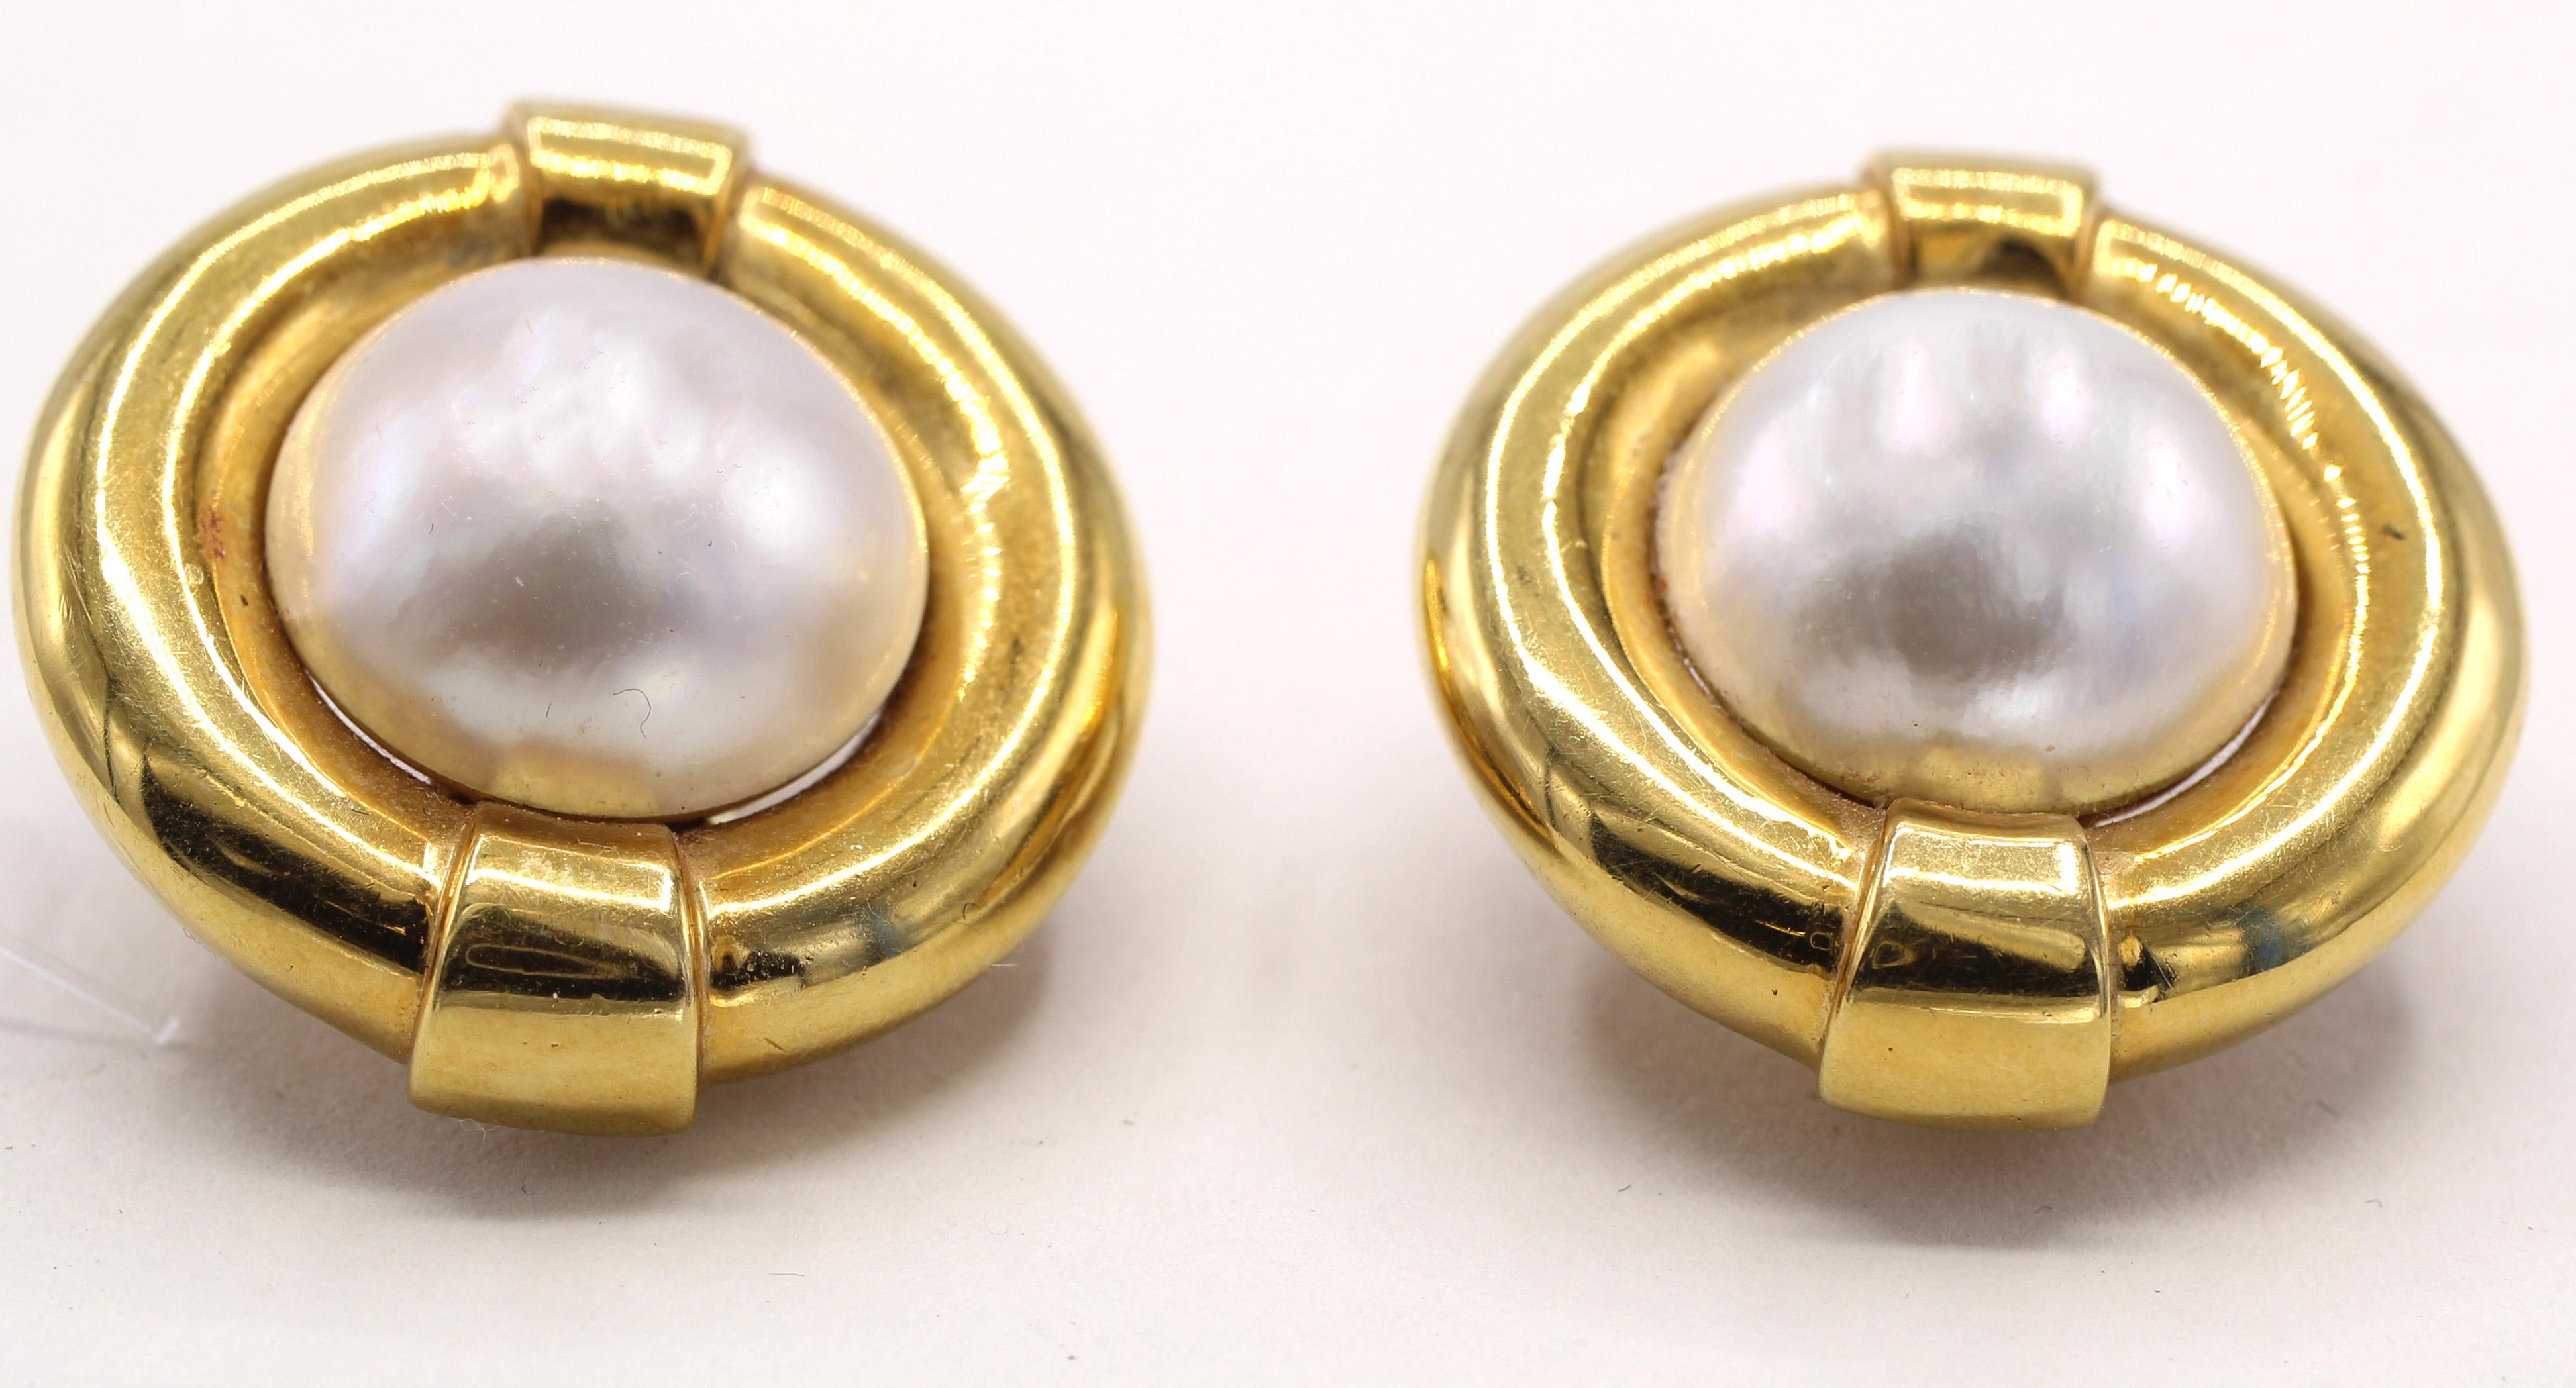 Beautifully designed and masterfully handcrafted by the iconic American jeweler David Webb these chic, stylish and highly wearable 1980s ear clips are truly timeless. 2 perfectly matched white lustrous mabe pearls are the center piece of these